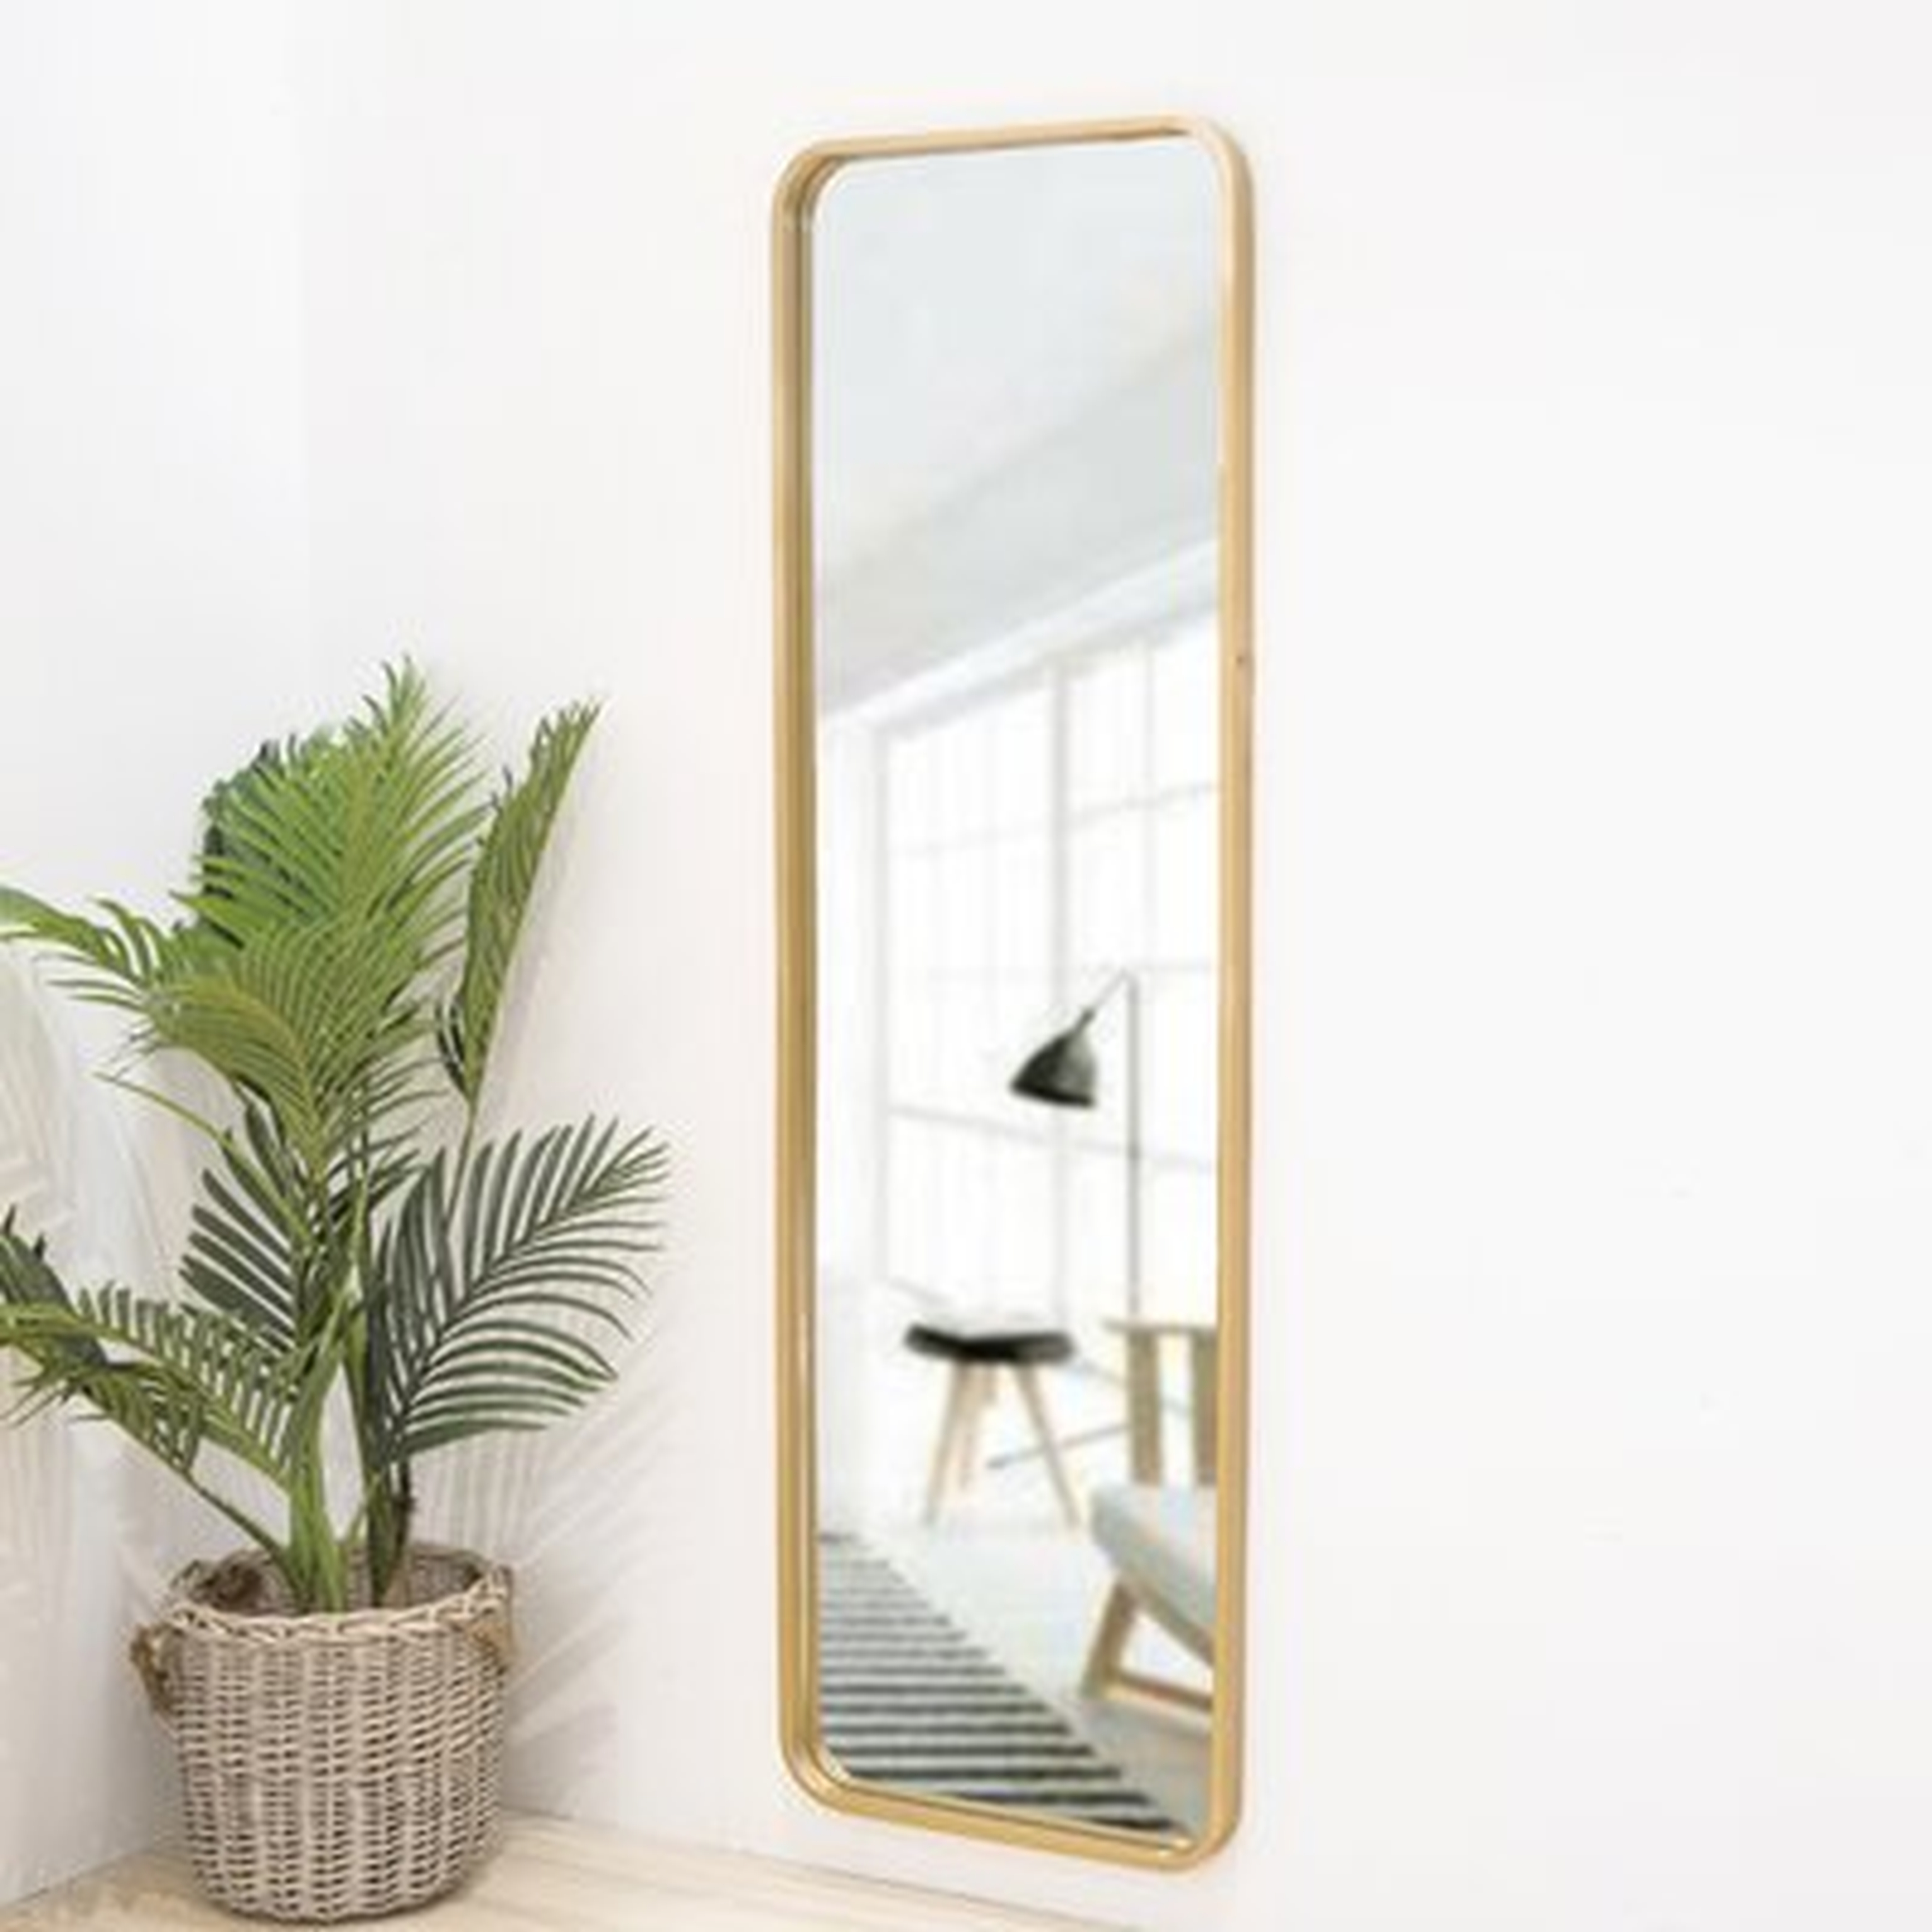 64.5 Inch High Gold Rounded Frame With Floor Stand Wrought Iron Full Length Mirror - Wayfair